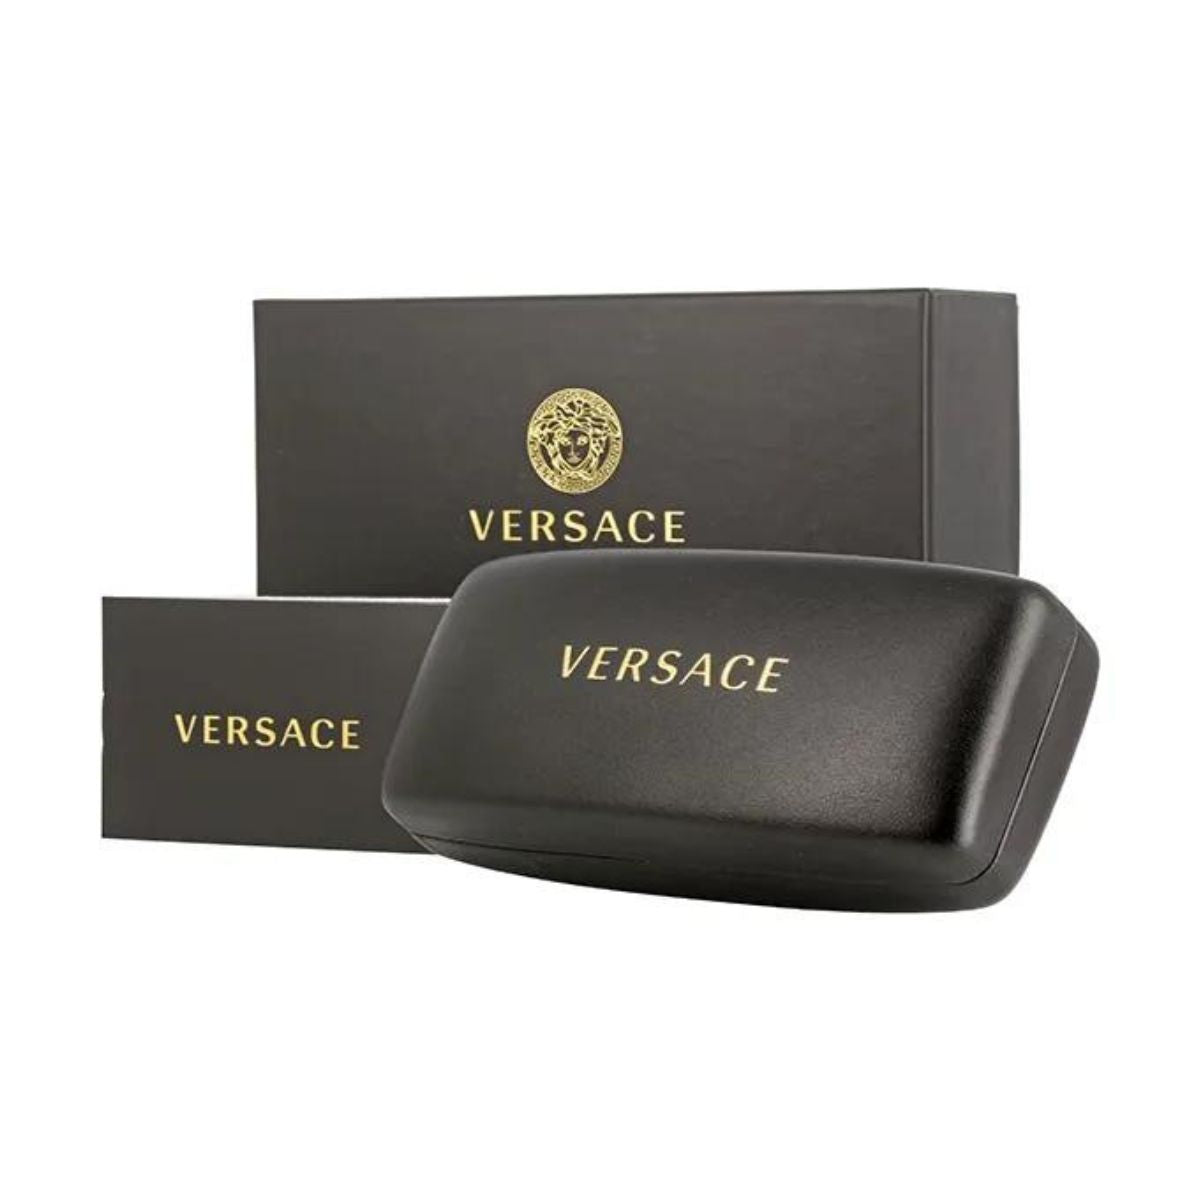 "Versace 4457 GB1/87 Men's Sunglasses for UV Ray Protection At Optorium"
